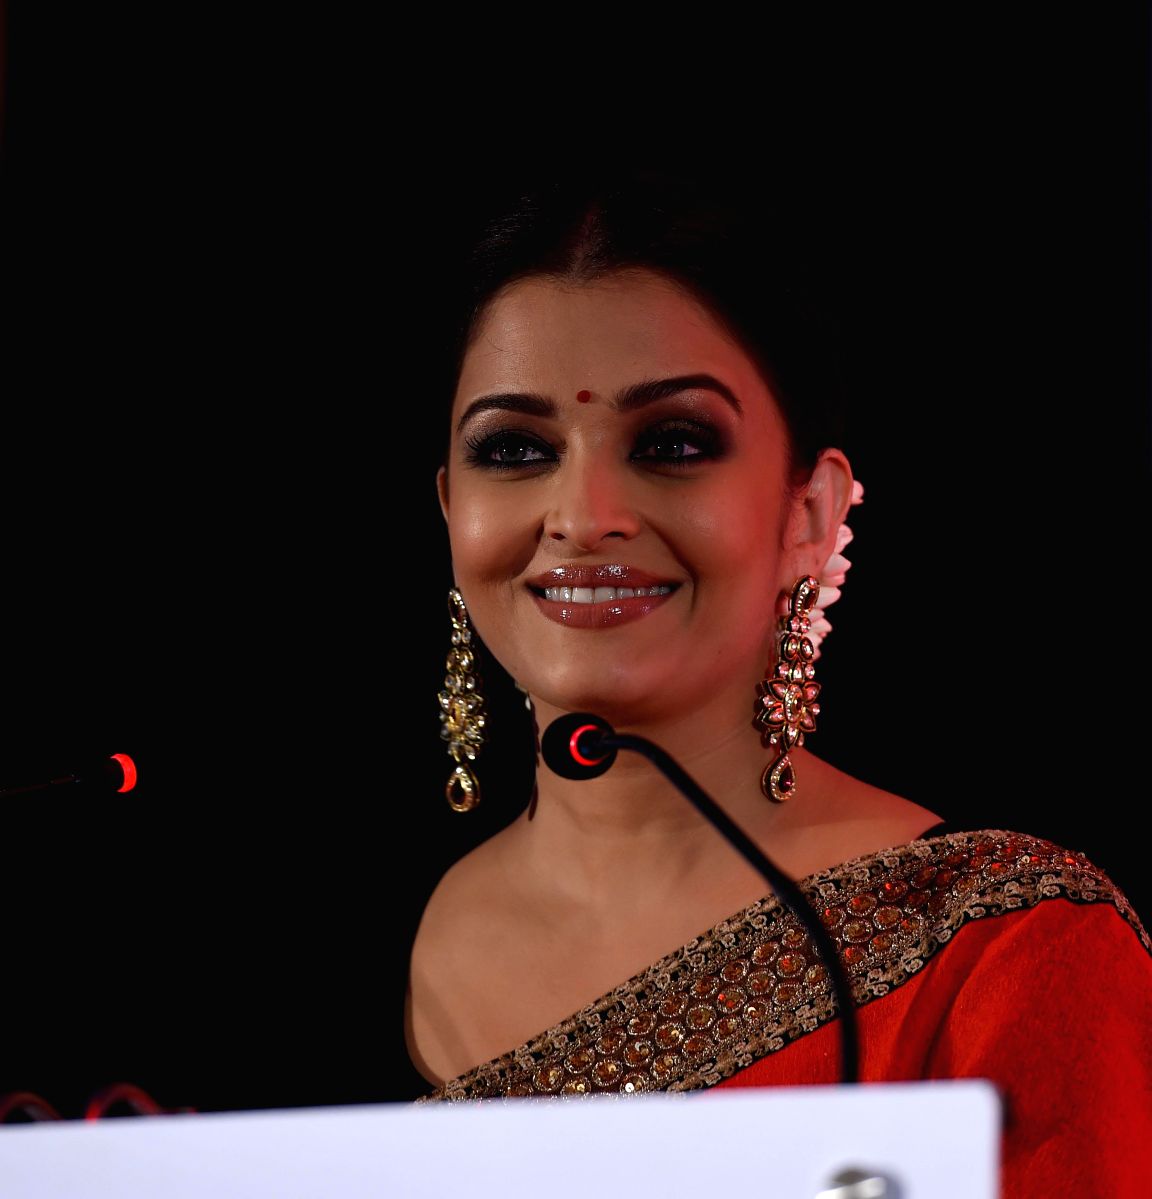 Aishwarya is the epitome of grace in this lovely red brocade saree